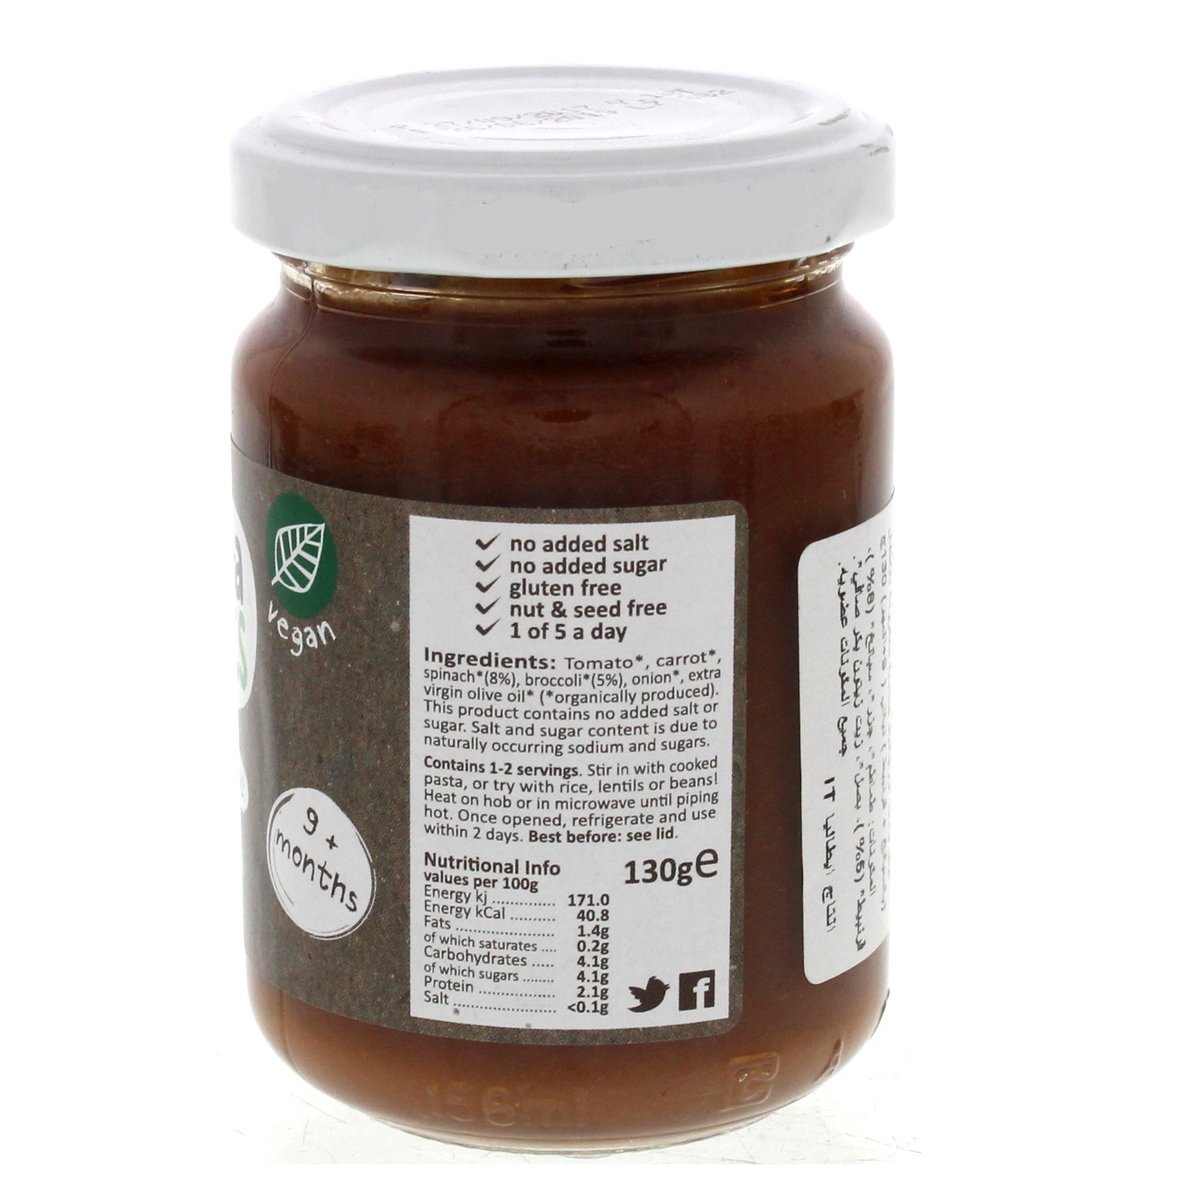 Little Pasta Organics Pasta Sauce For Kids Spinach And Broccoli 130 g